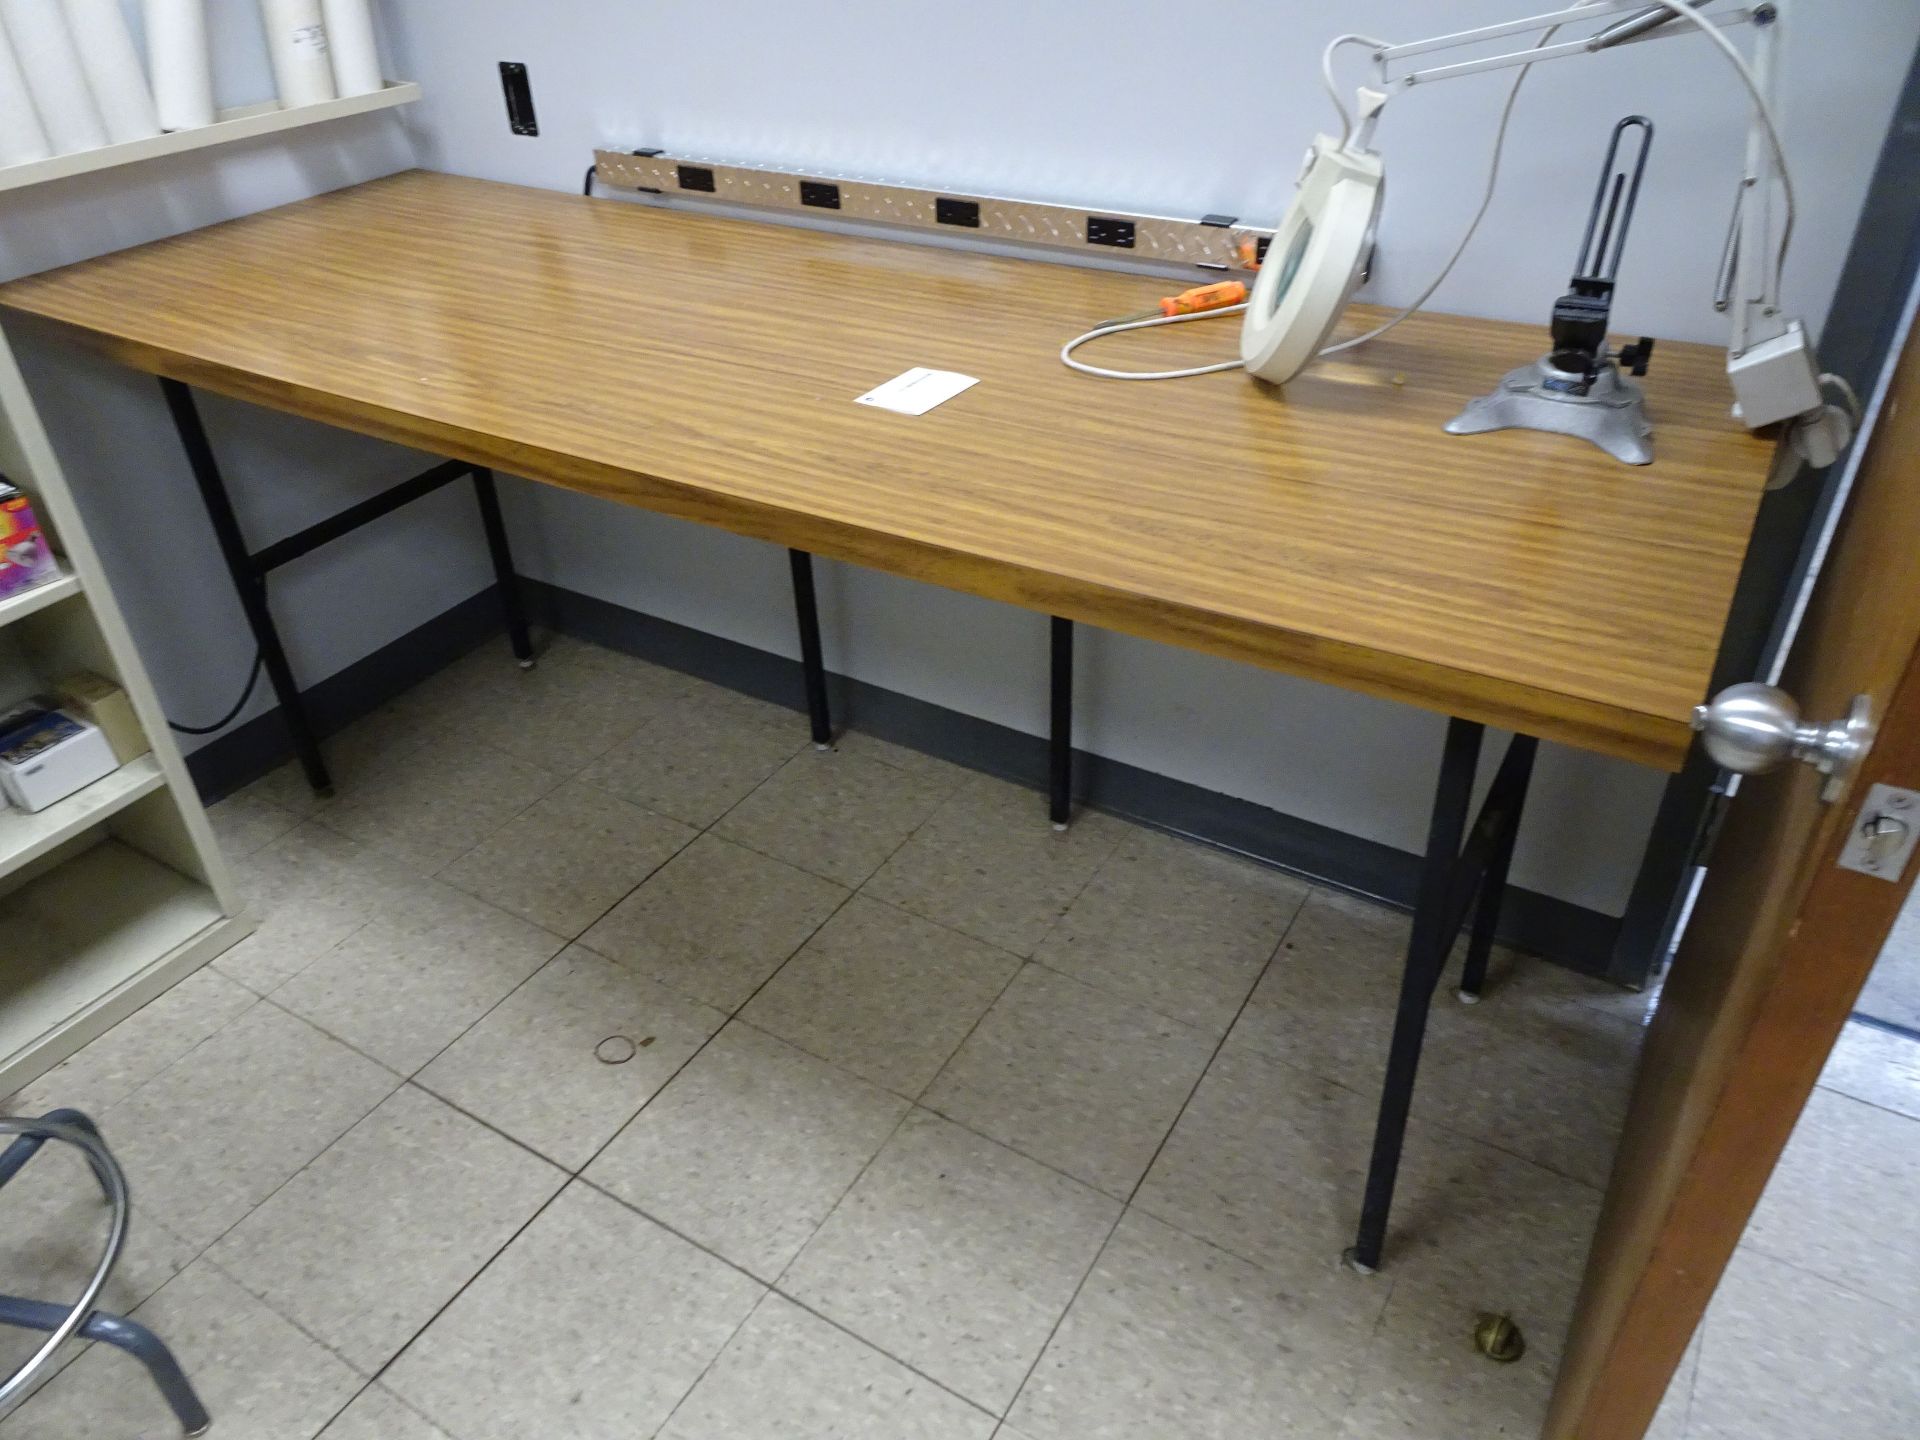 (LOT) DESK WITH FILE CABINET - Image 3 of 3